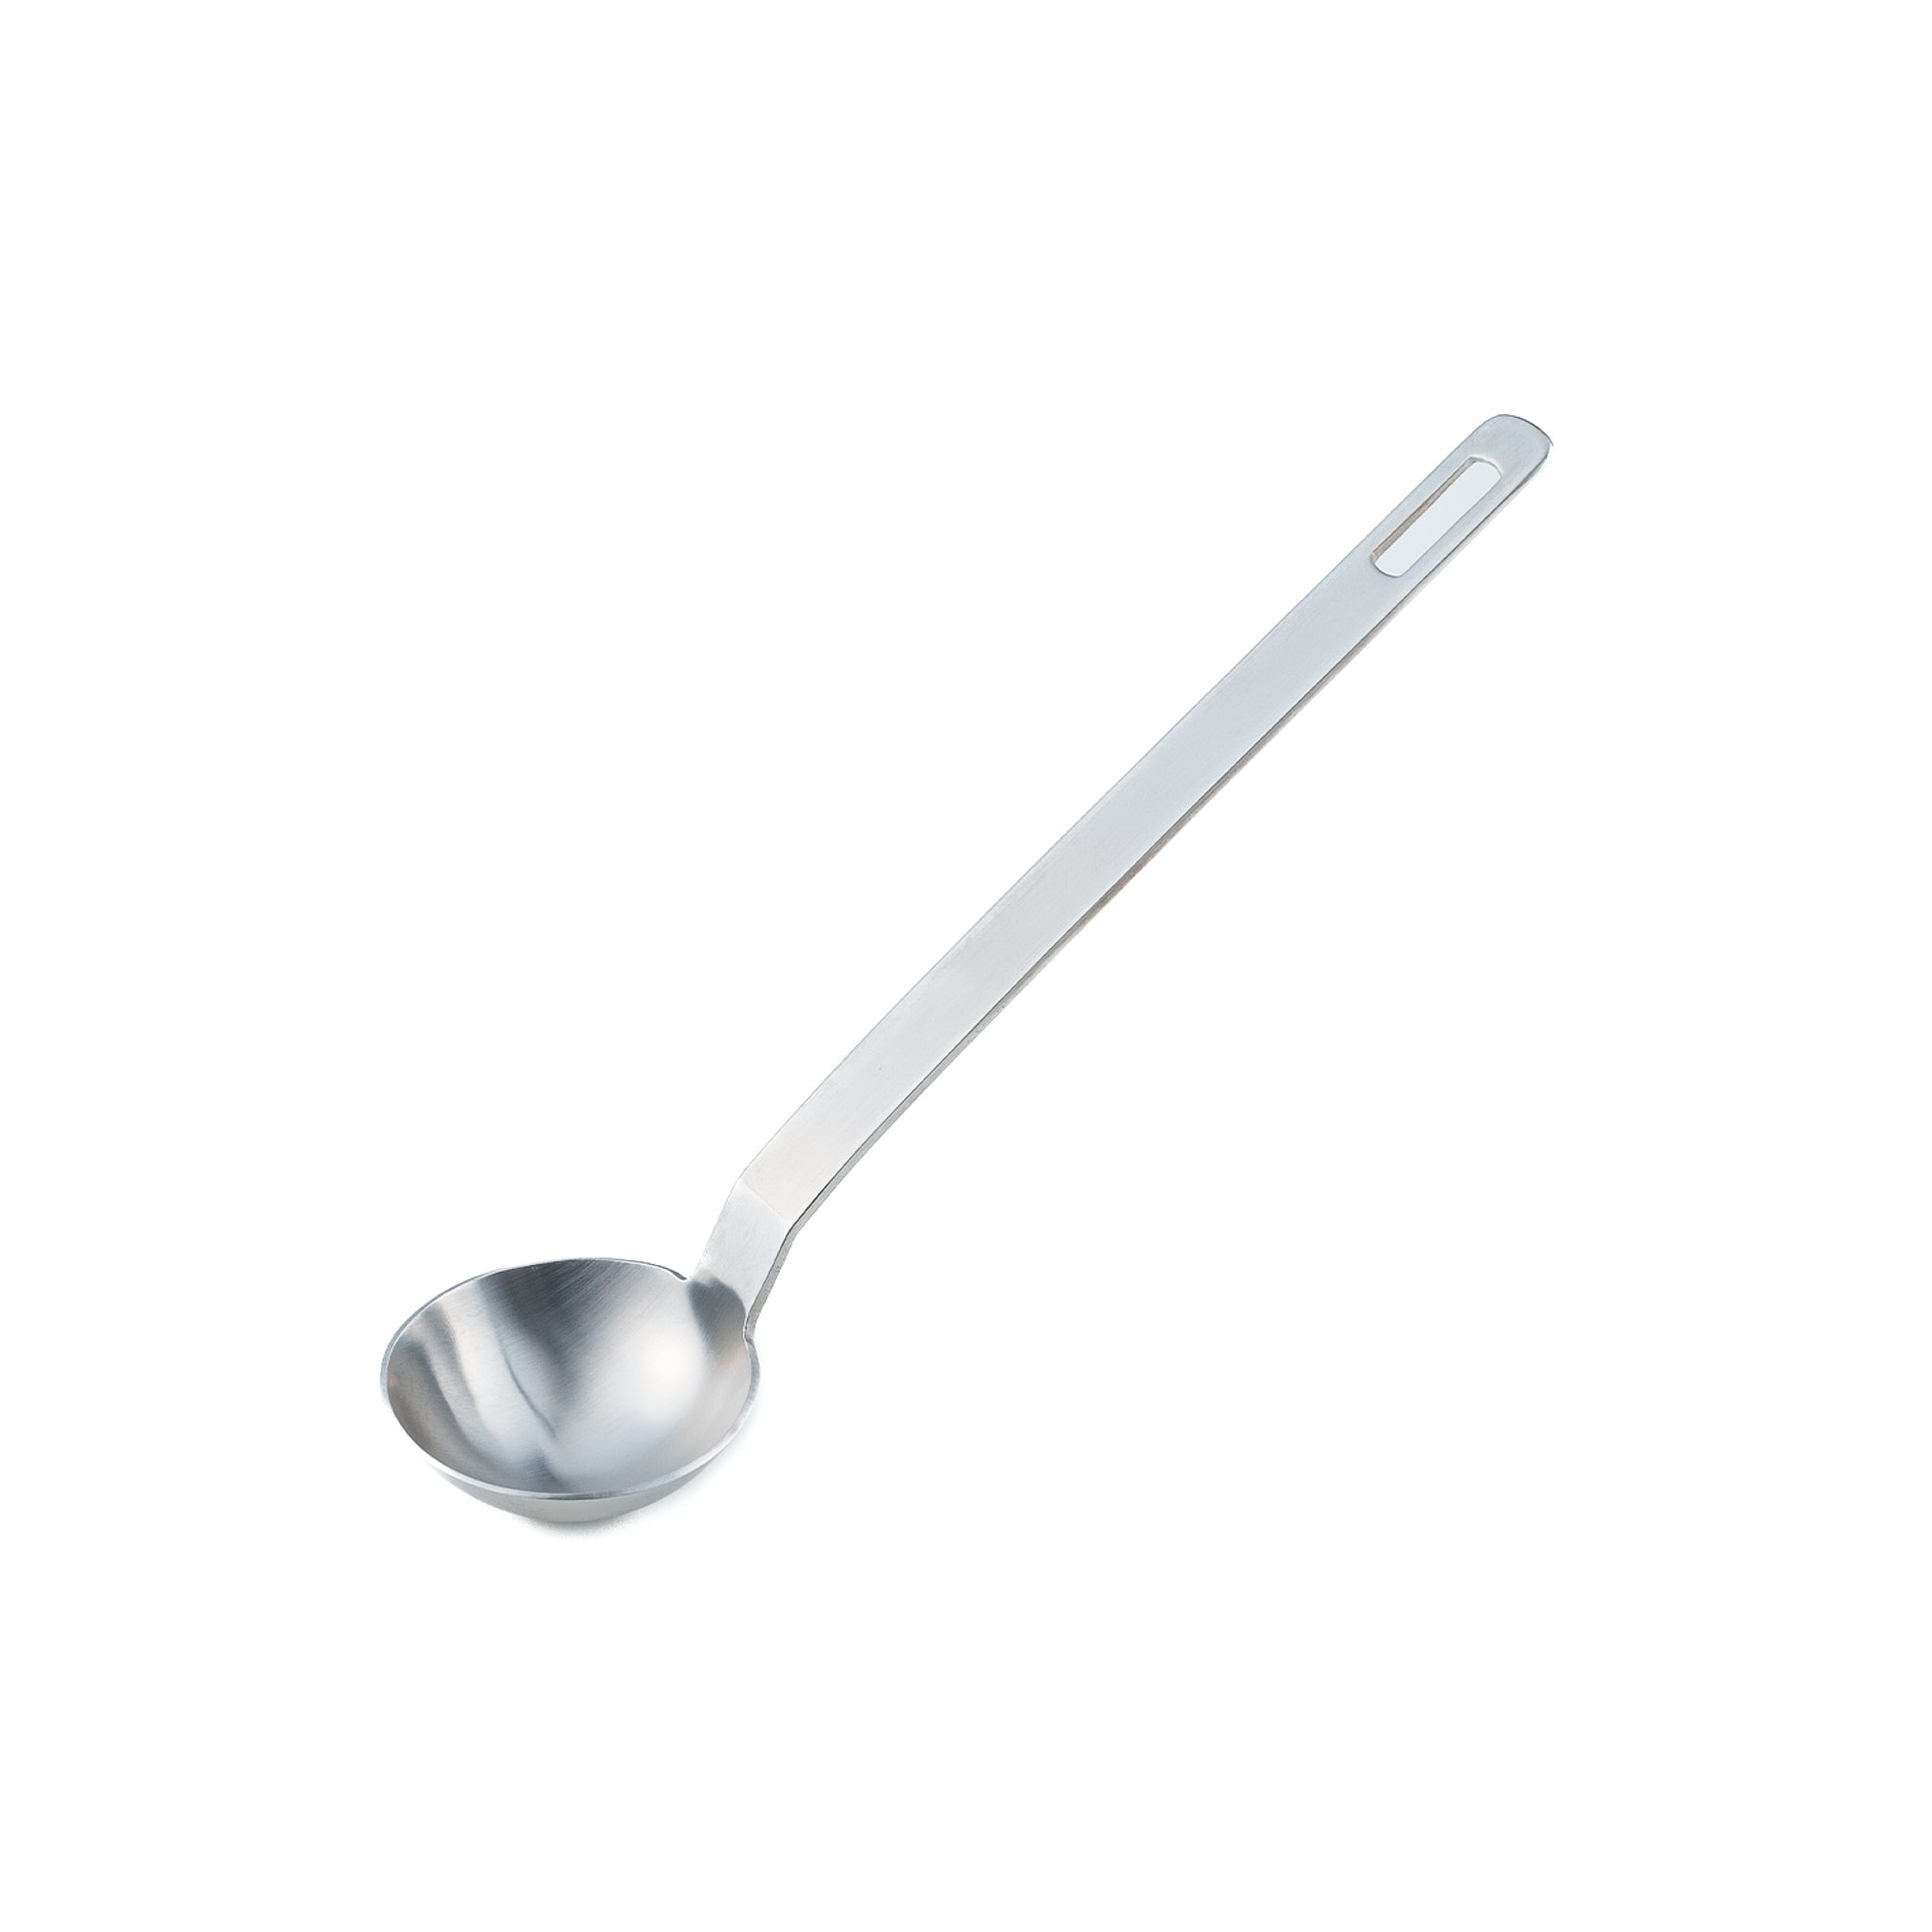 Japanese Stainless Steel Tablespoon Measure, 19.5cm